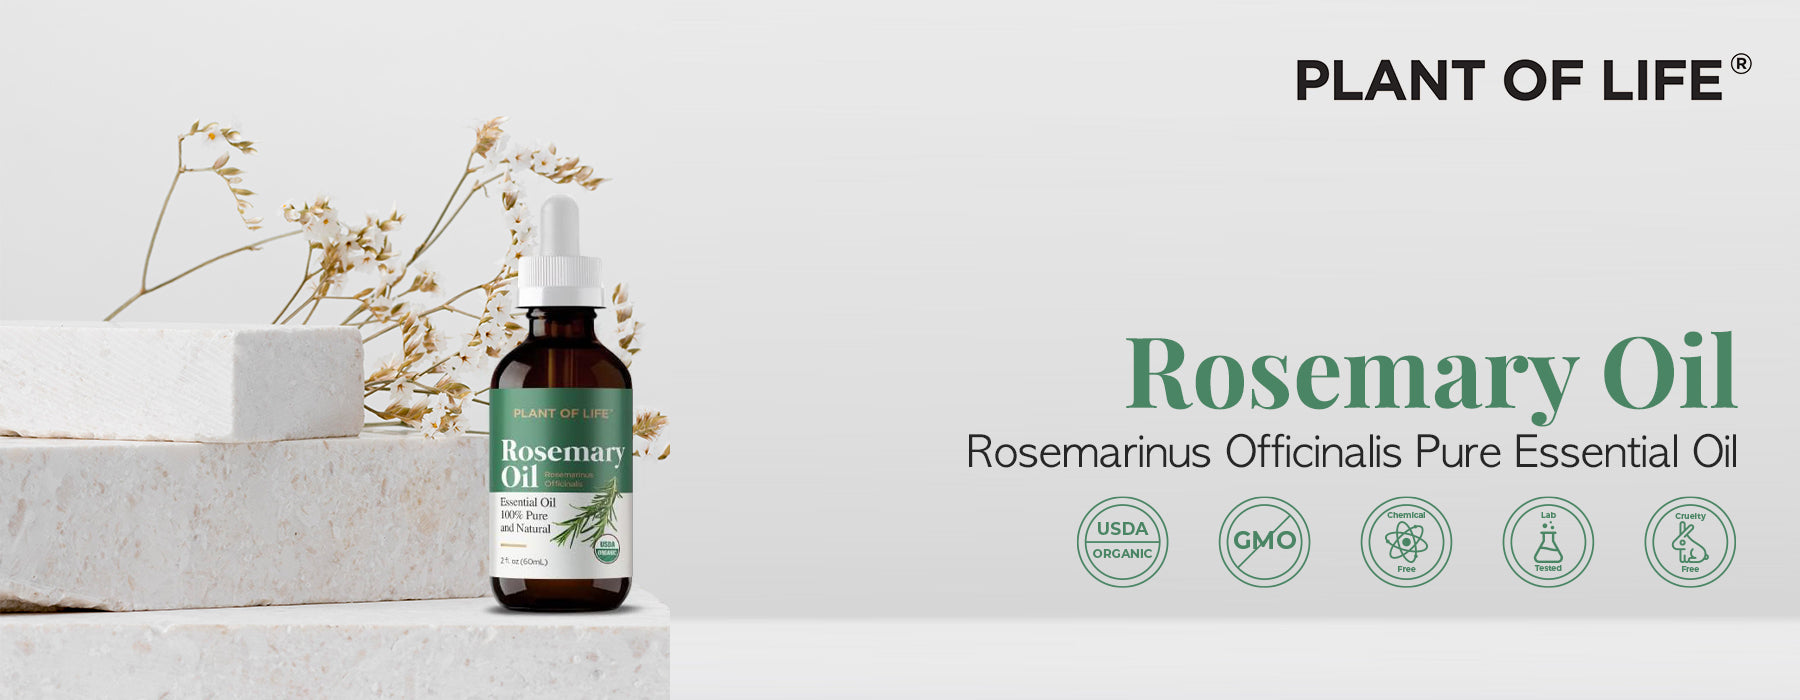 onewholesale.ca plant of life rosemary oil main banner